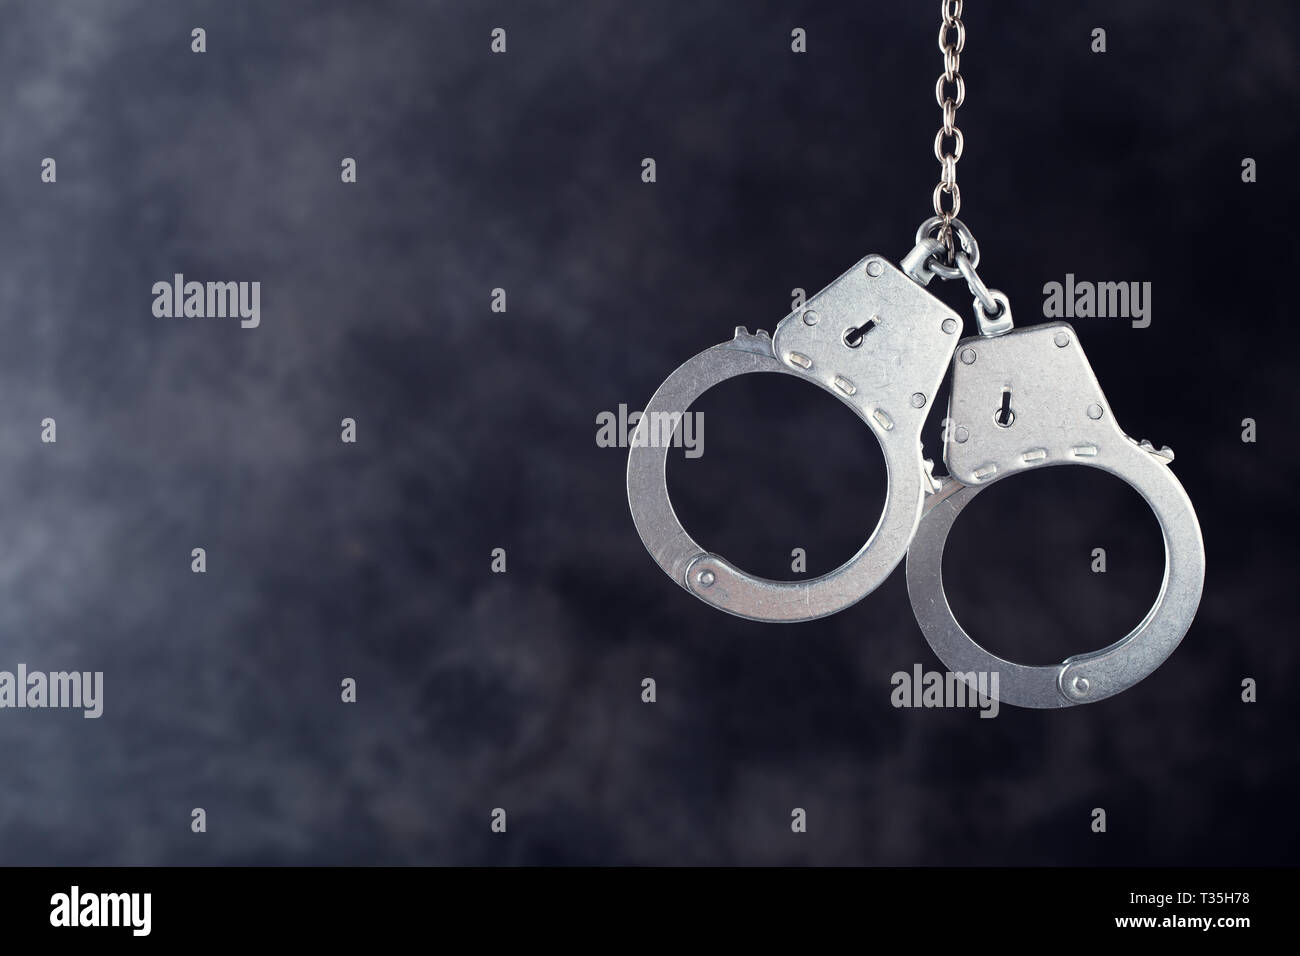 Handcuffs hanging against a dark background with copy space Stock Photo